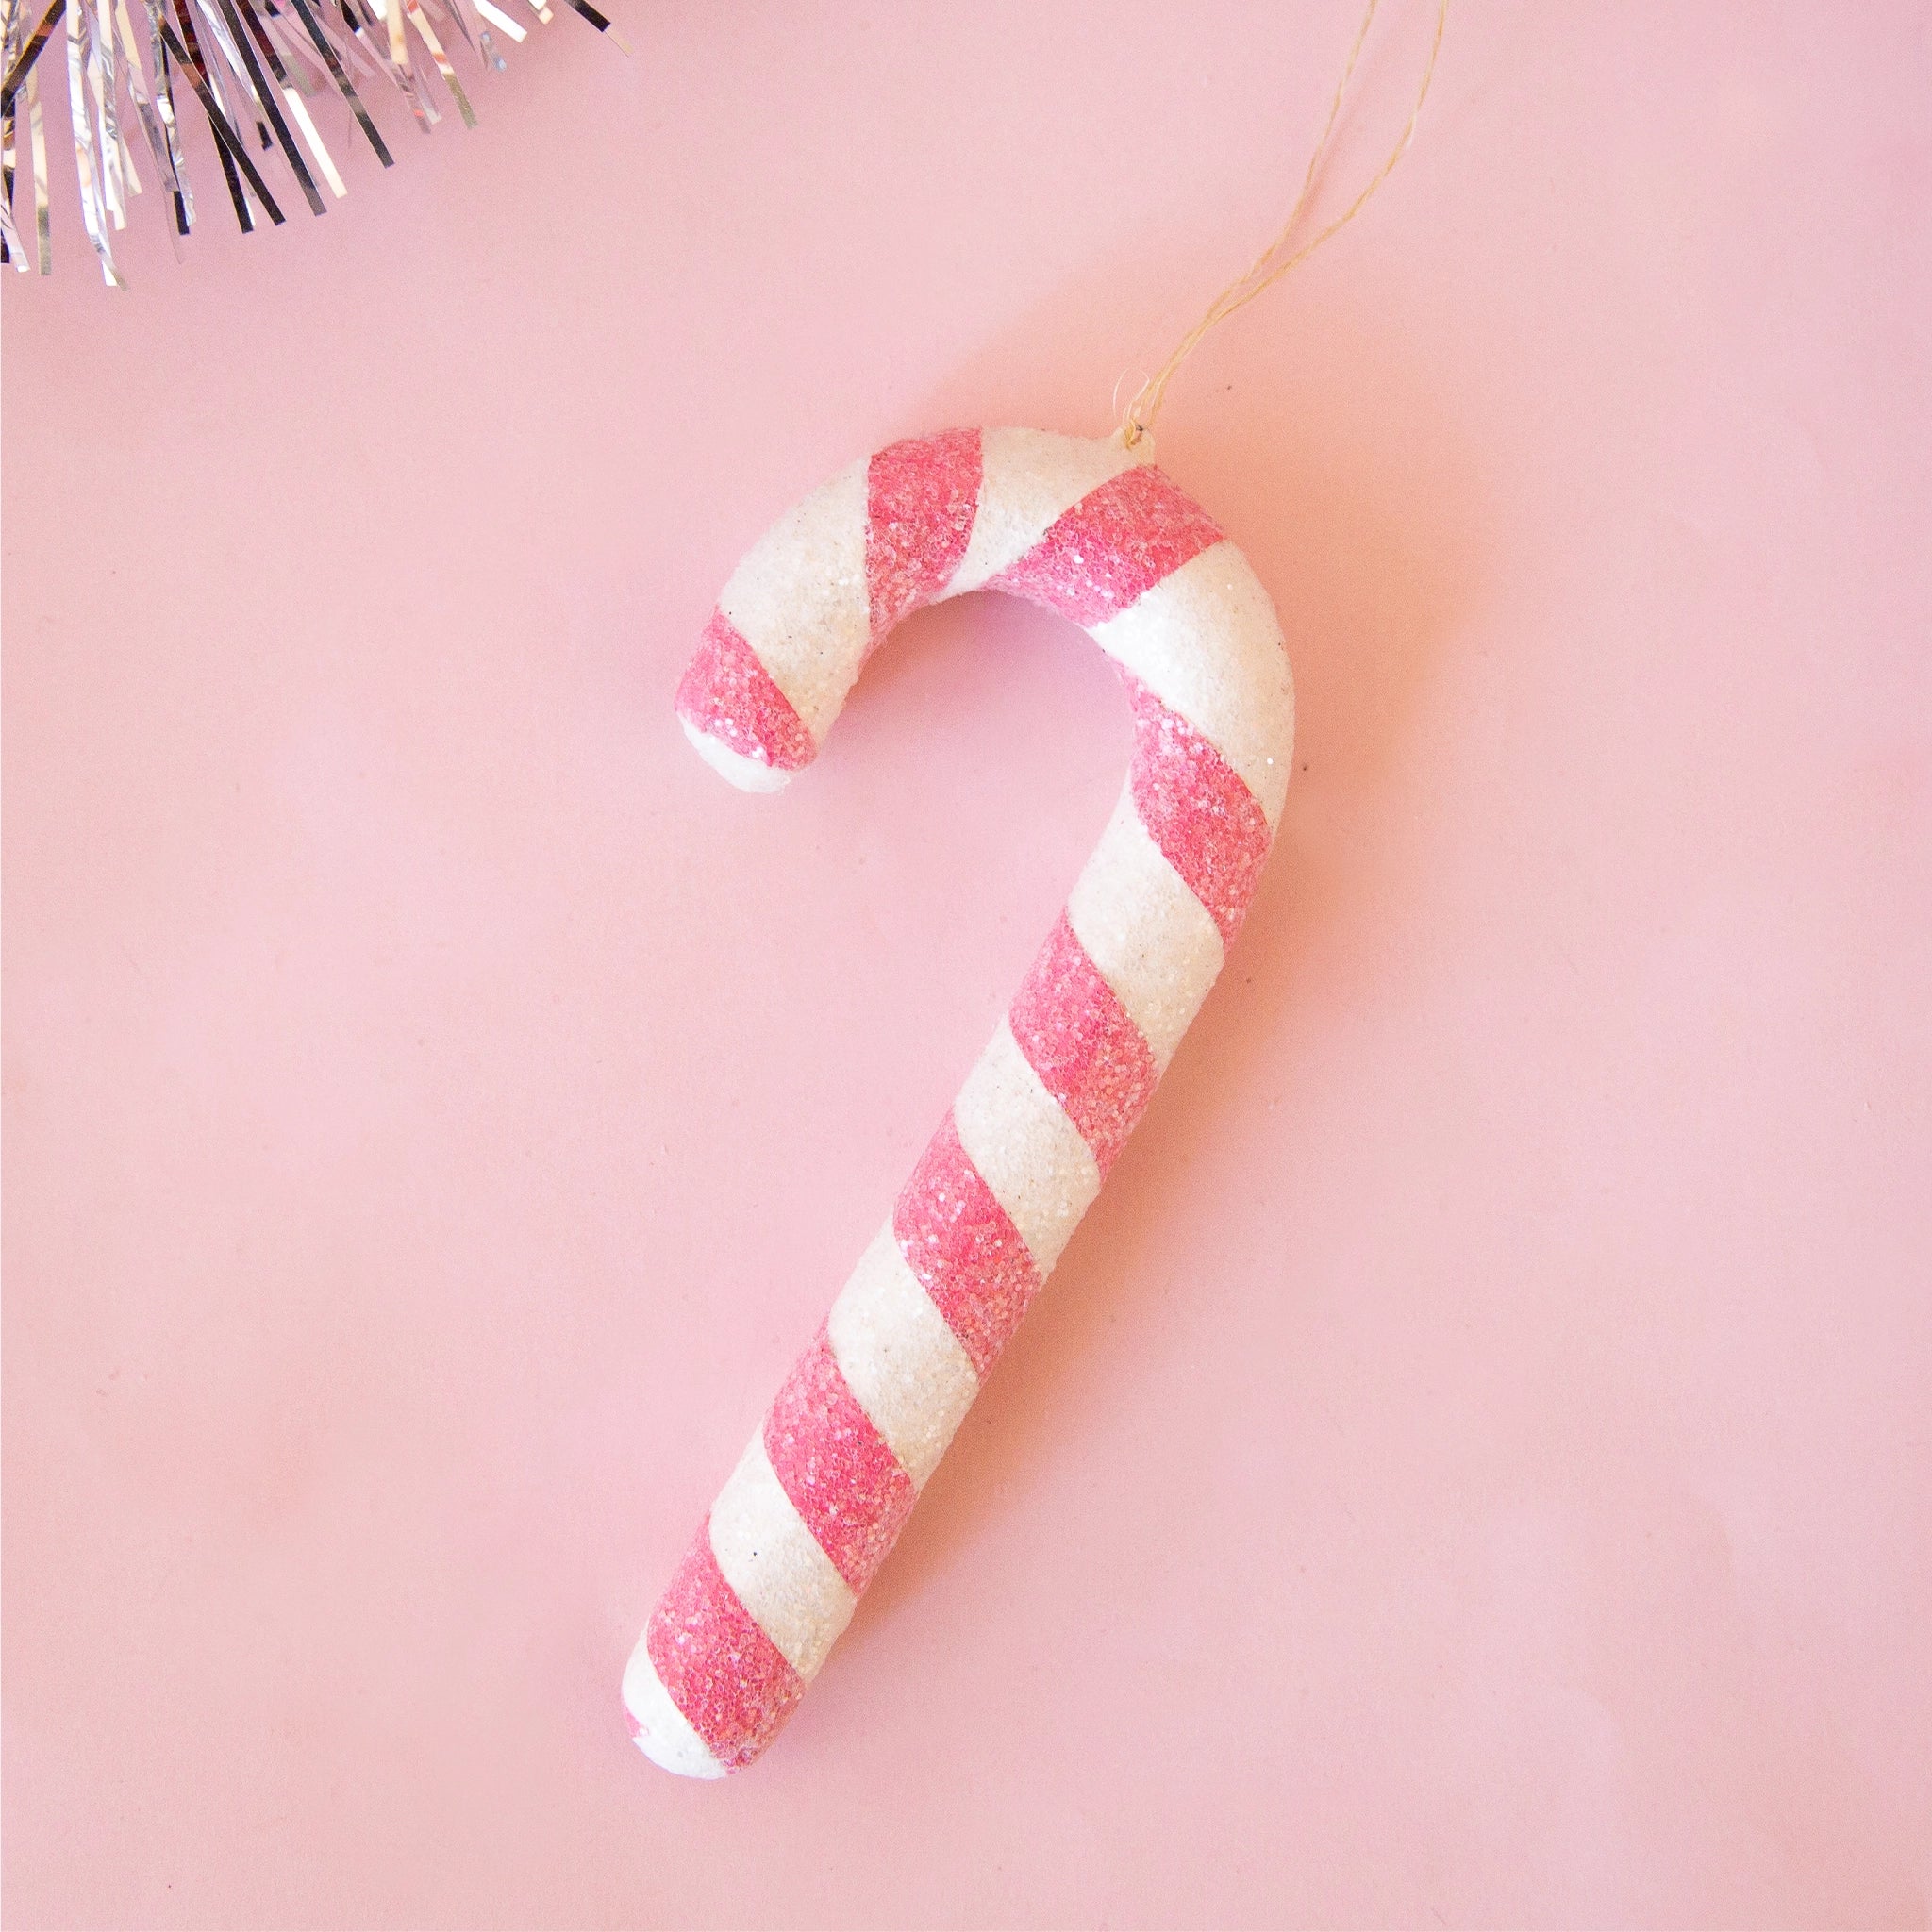 On a pink background is a white and pink candy cane shaped ornament. 